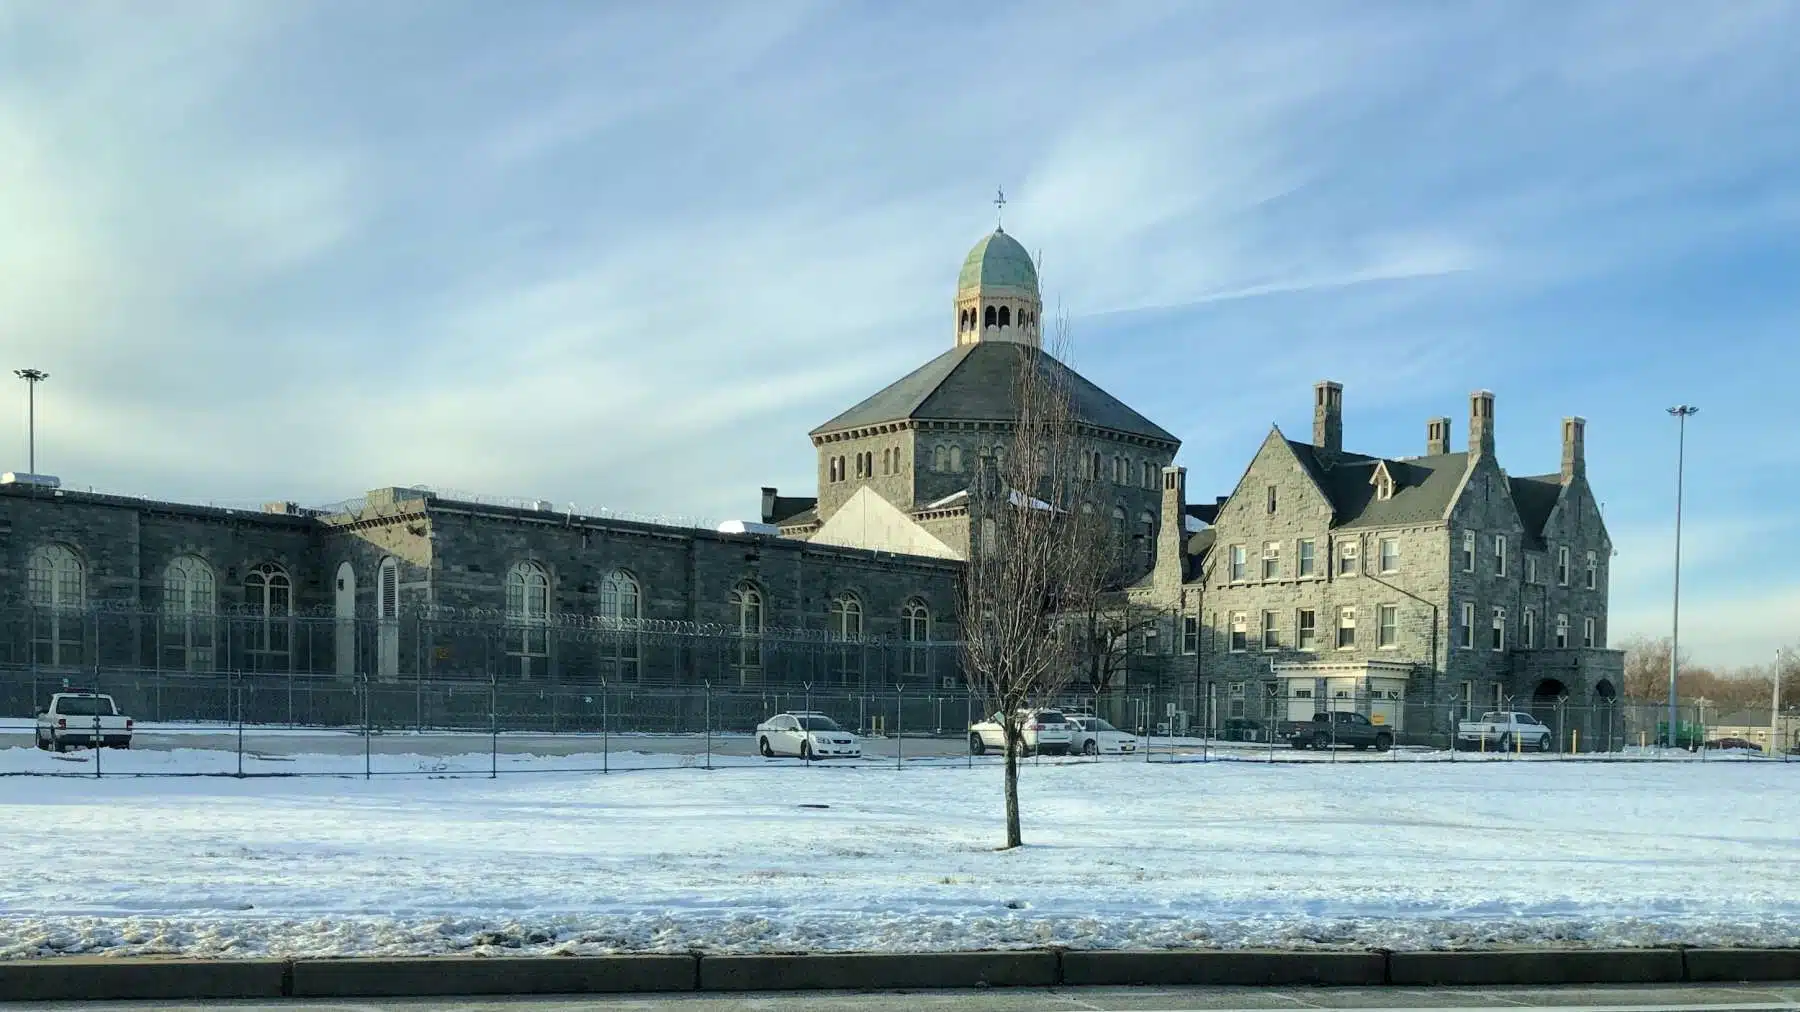 Rhode Island News: Decarcerate Now rallies for the release of incarcerated persons during Covid outbreak